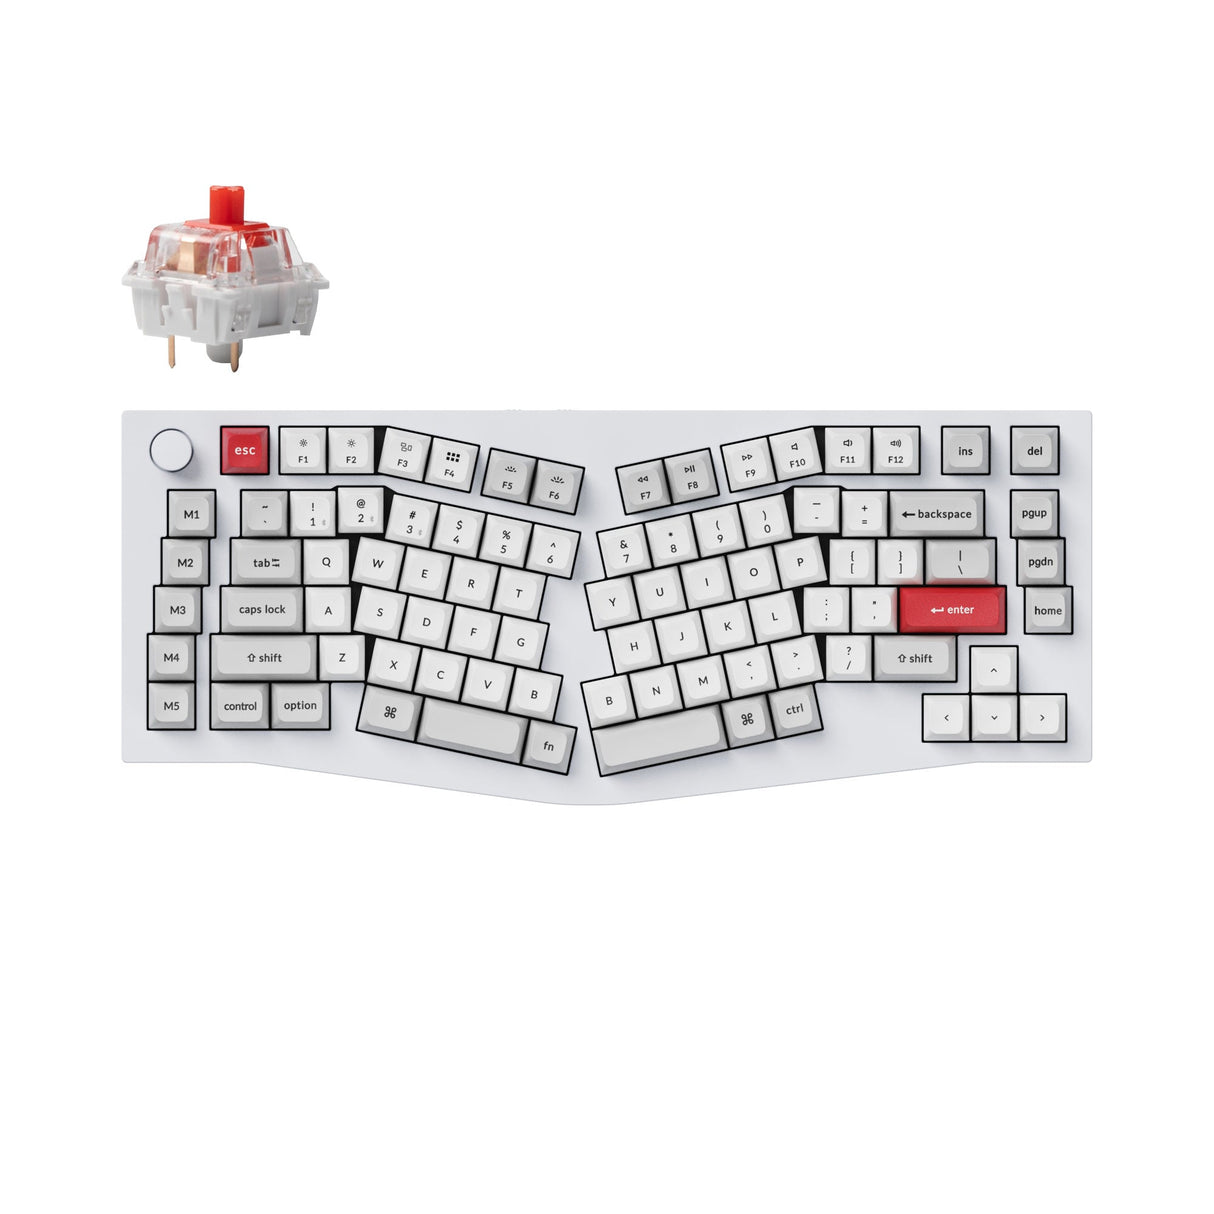 Keychron Q10 Pro QMK/VIA wireless custom mechanical keyboard 75 percent Alice layout full aluminum white frame for Mac Windows Linux with RGB backlight hot-swappable K Pro red